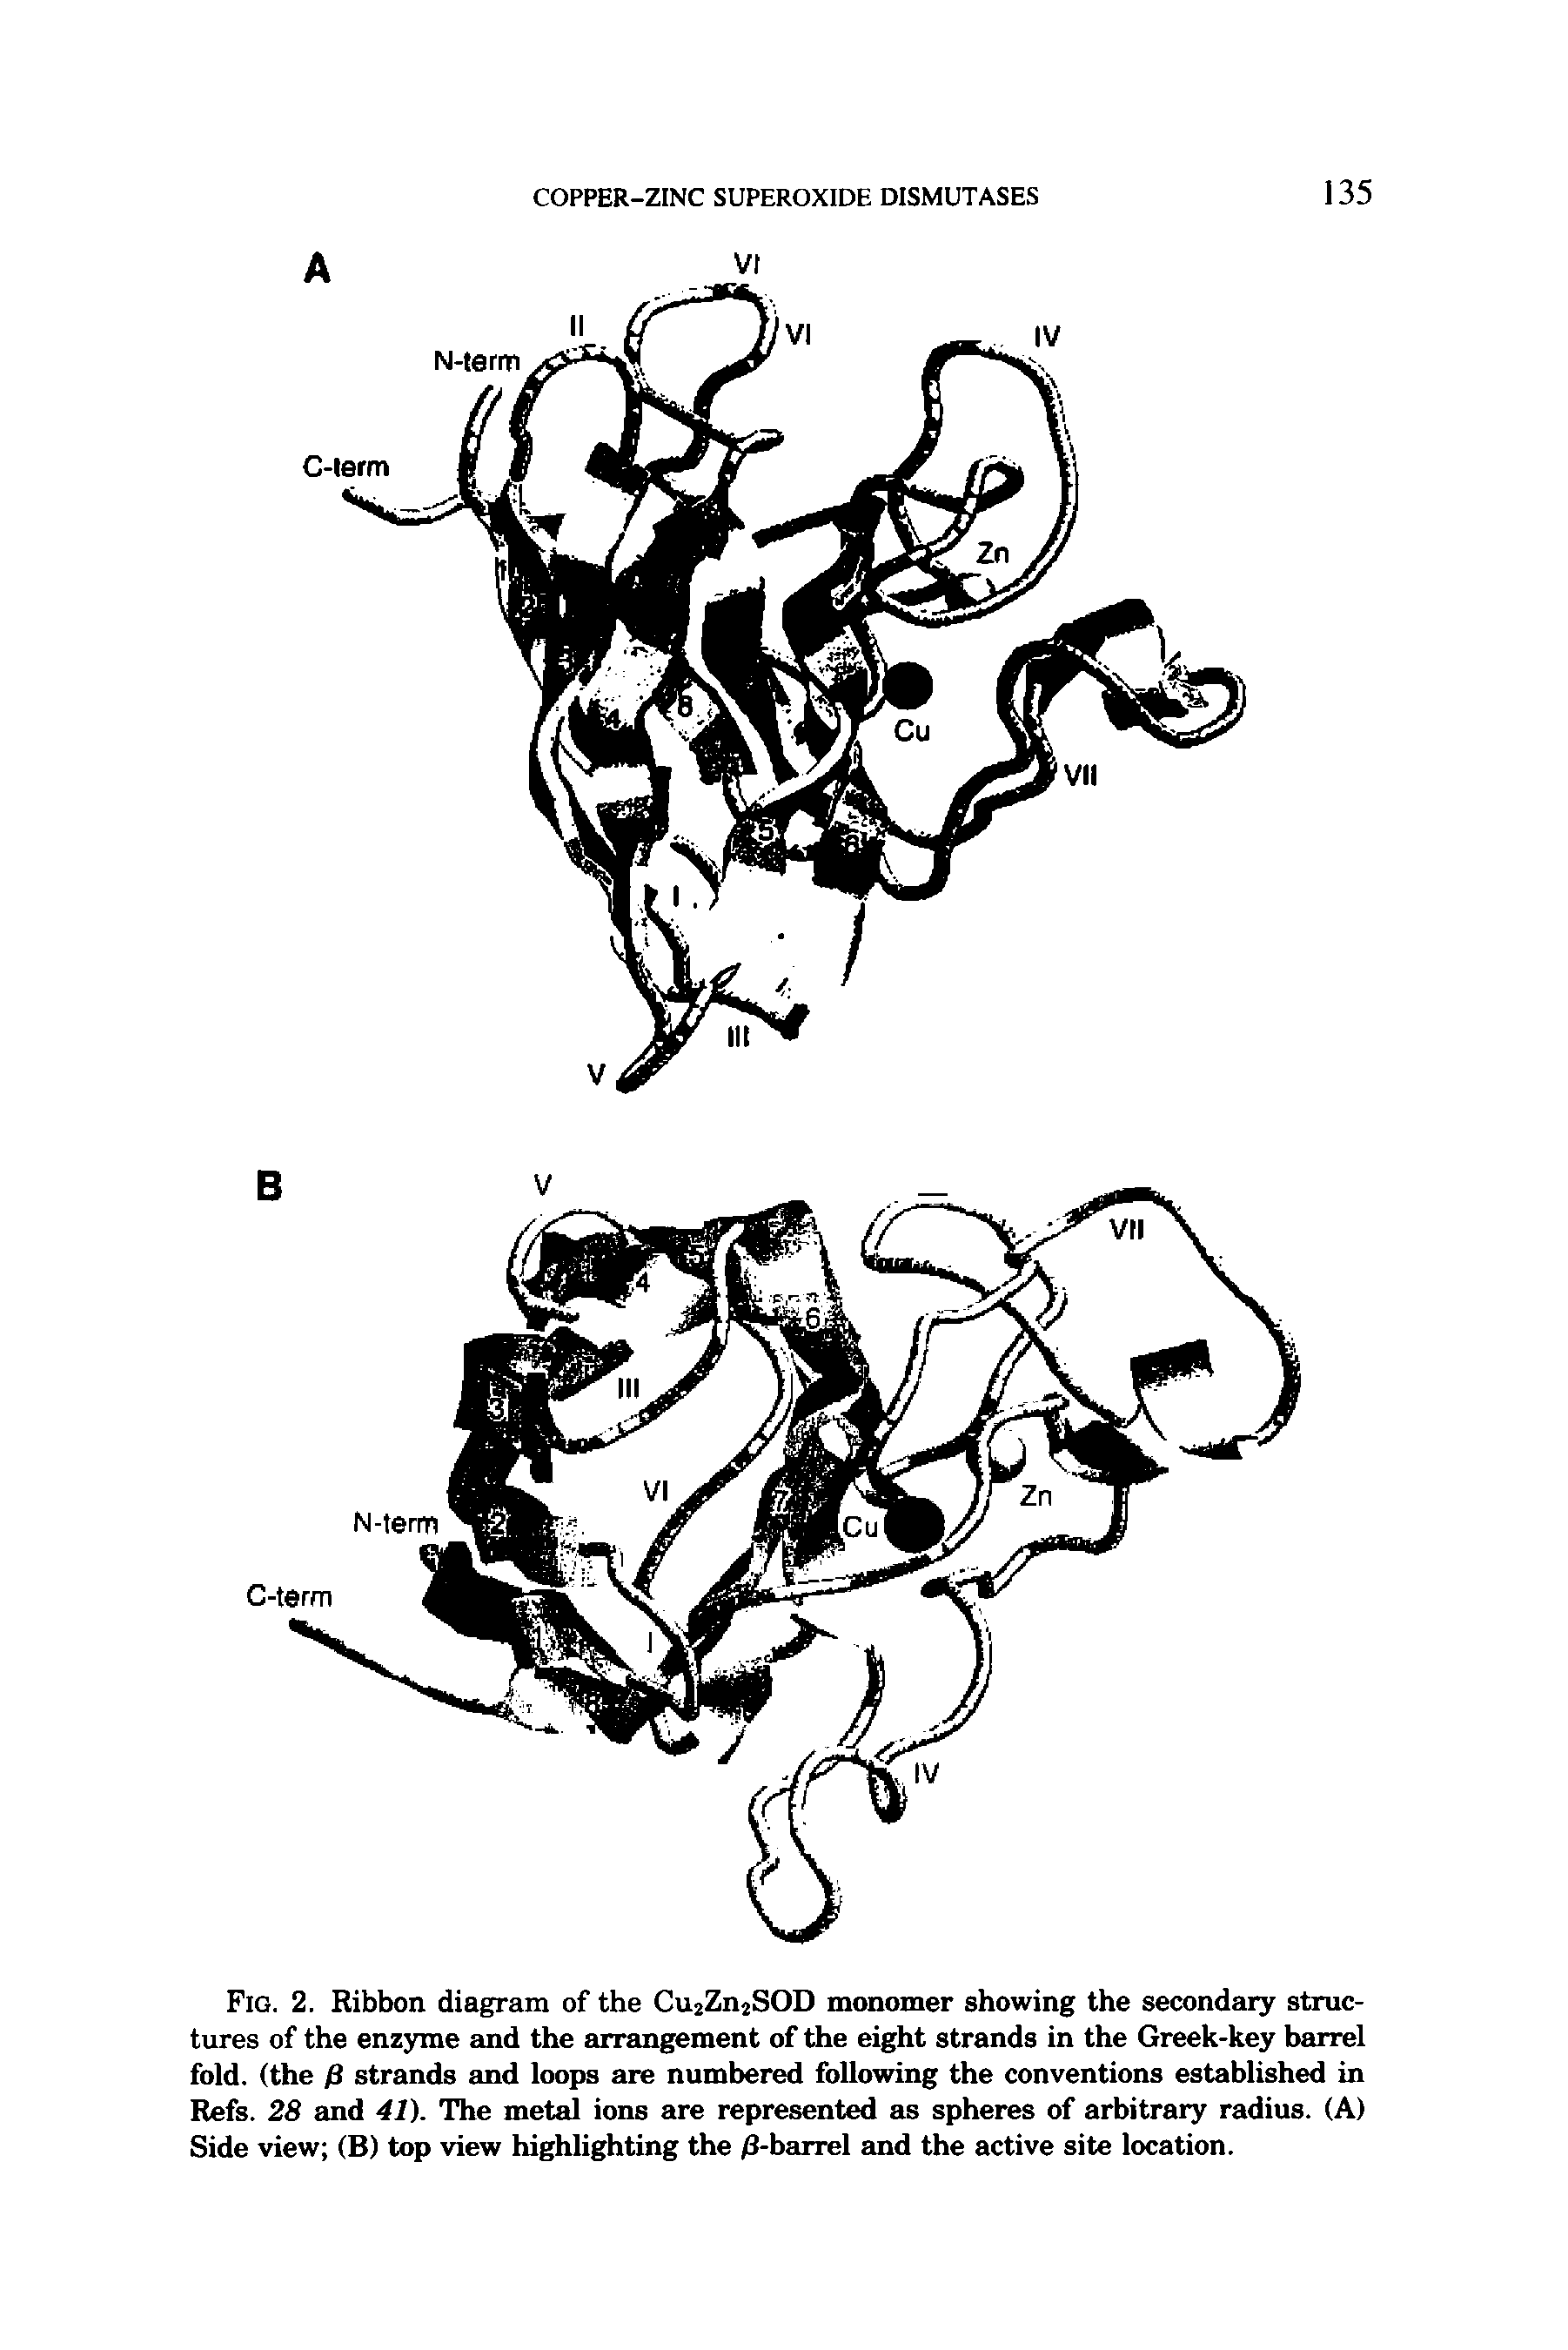 Fig. 2. Ribbon diagram of the Cu2Zn2SOD monomer showing the secondary structures of the enzyme and the arrangement of the eight strands in the Greek-key barrel fold, (the P strands and loops are numbered following the conventions established in Refs. 28 and 41). The metal ions are represented as spheres of arbitrary radius. (A) Side view (B) top view highlighting the /3-barrel and the active site location.